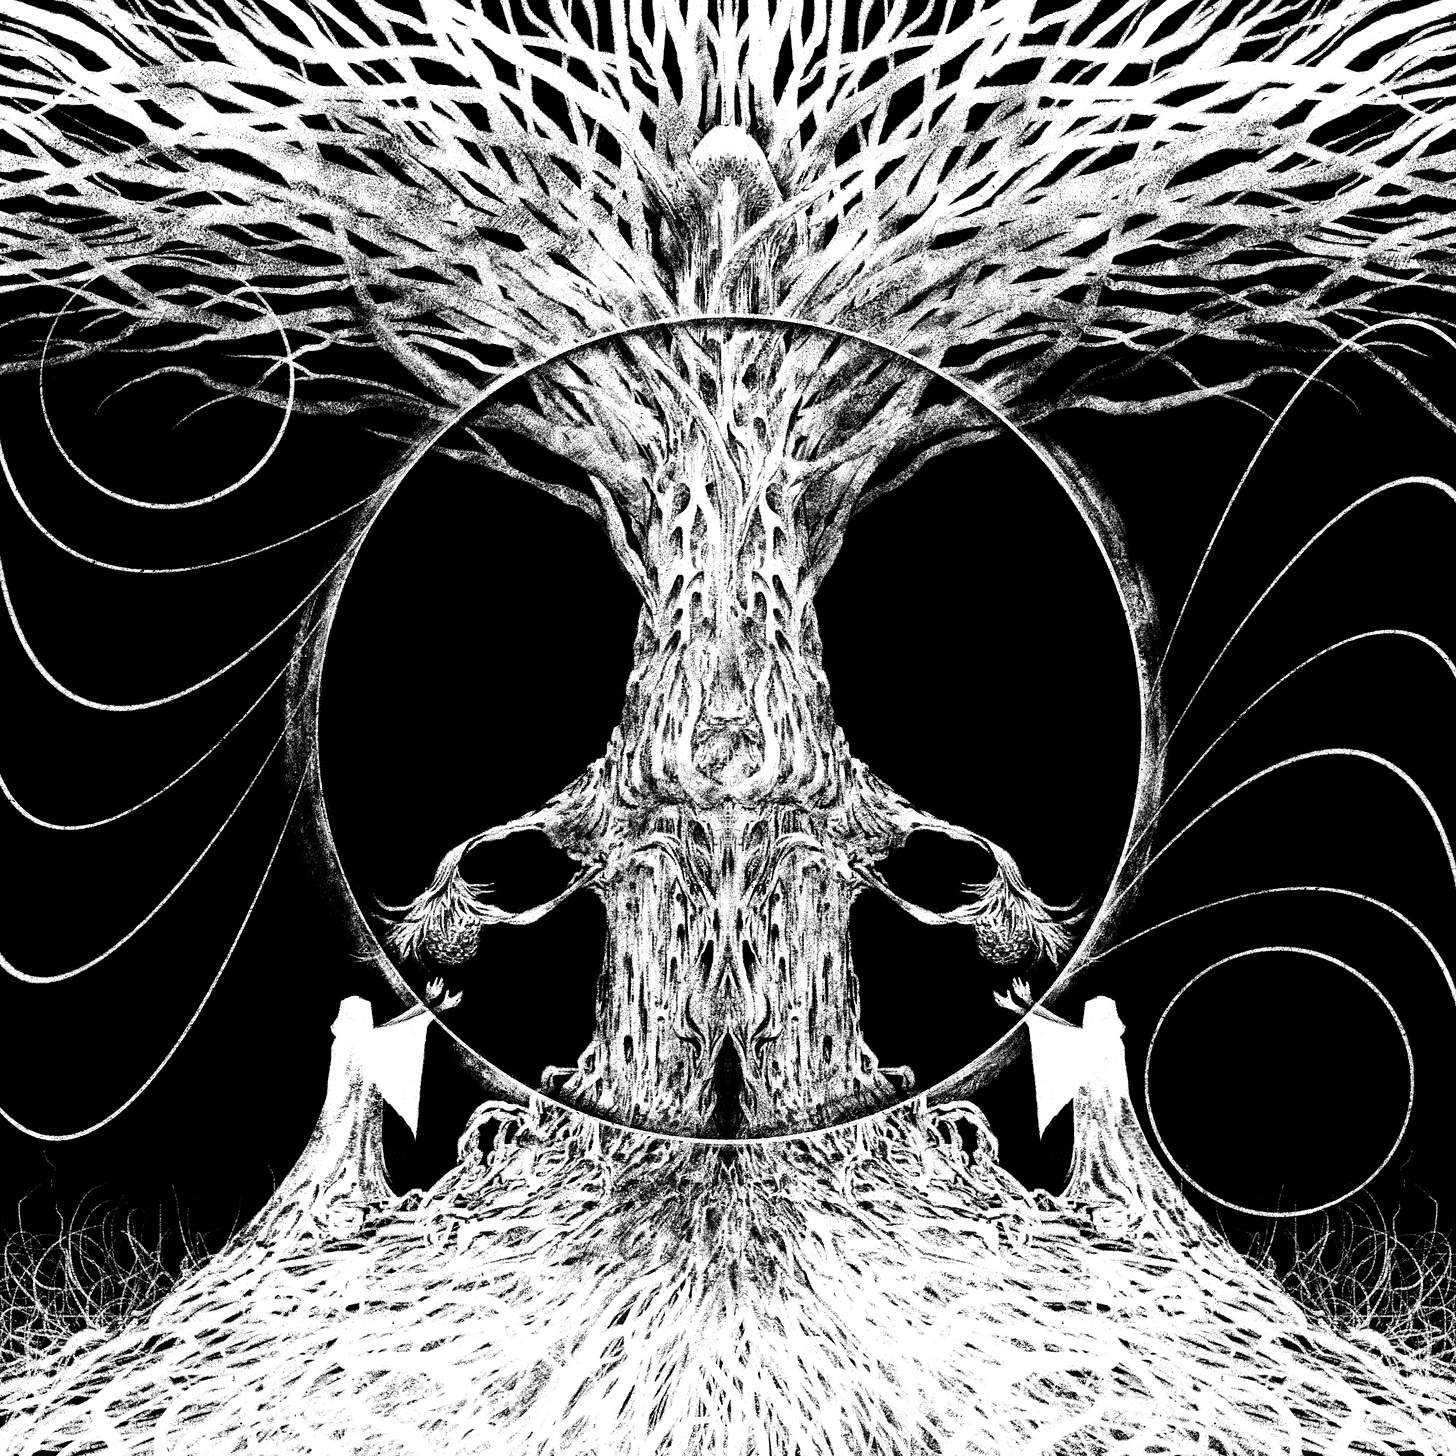 A black-and-white image of Stormgyre the Whorld One, an ancient tree bequeathing secrets to two acolytes.